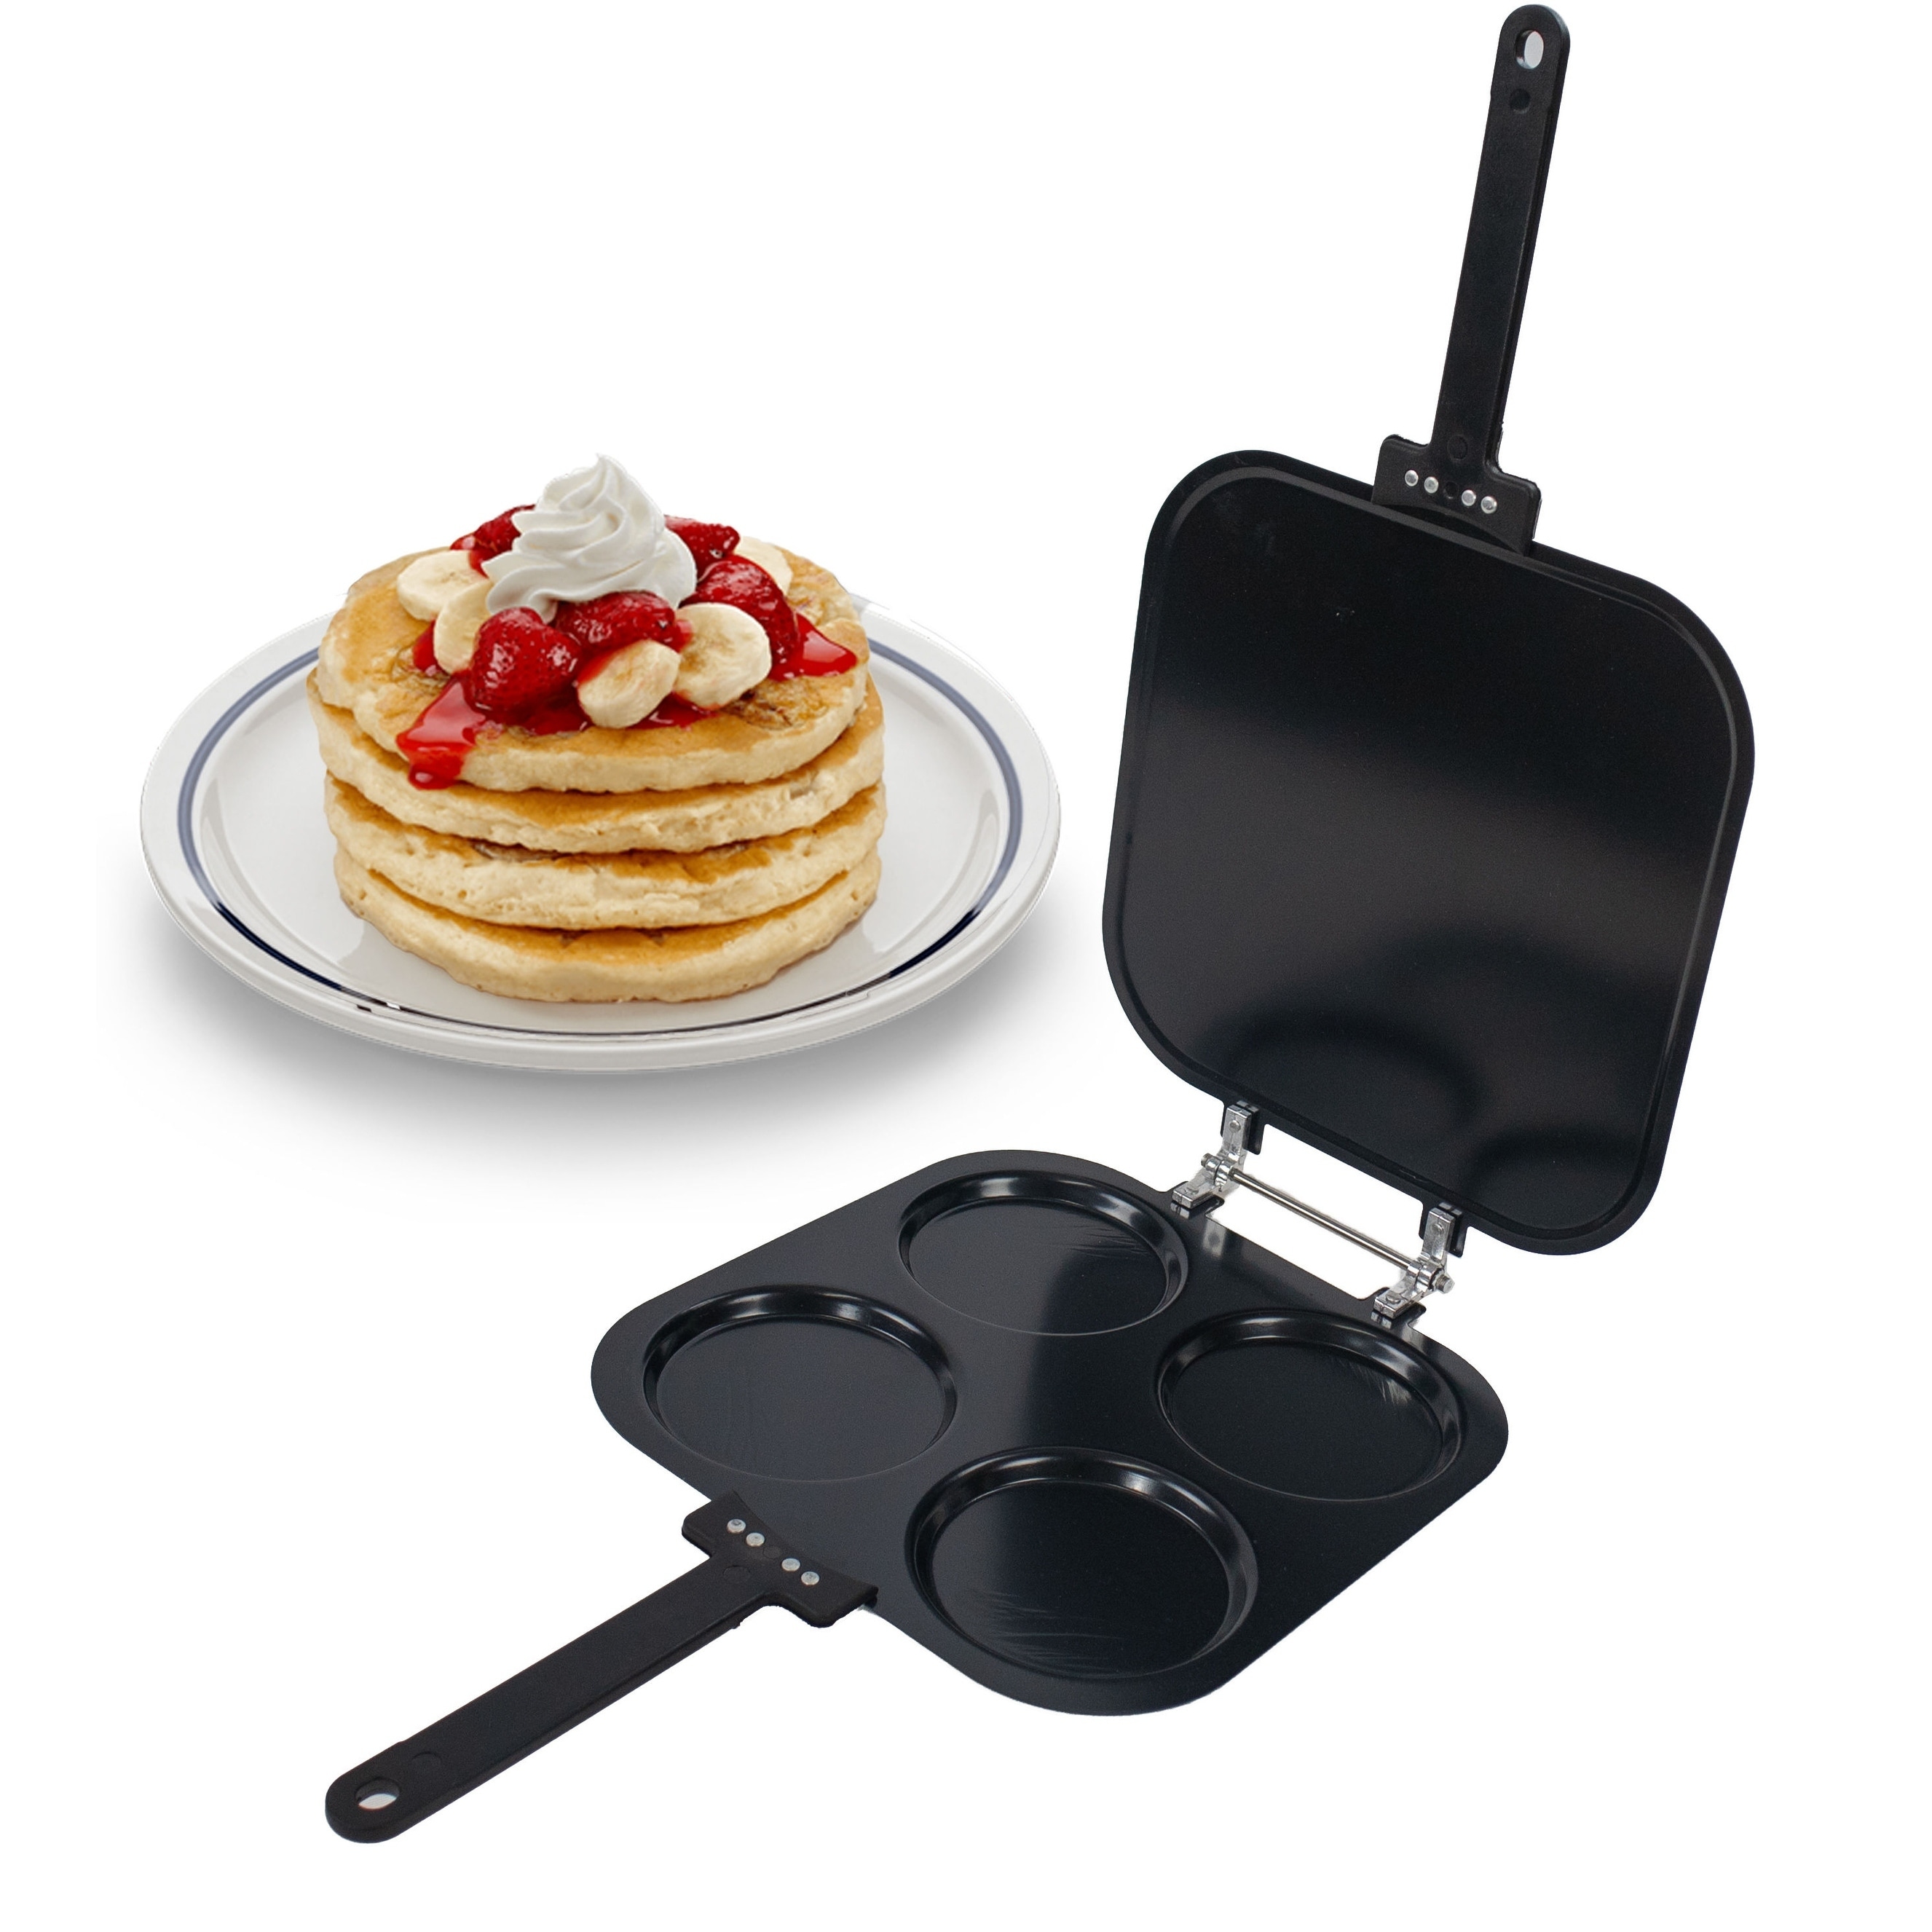 5 STAR SUPER DEALS Pancake Pan Maker Nonstick Double Sided w/ 4 Small  Decorative Mold Designs for Perfect Eggs, French Toast, Omelette, Flip  Jack, and